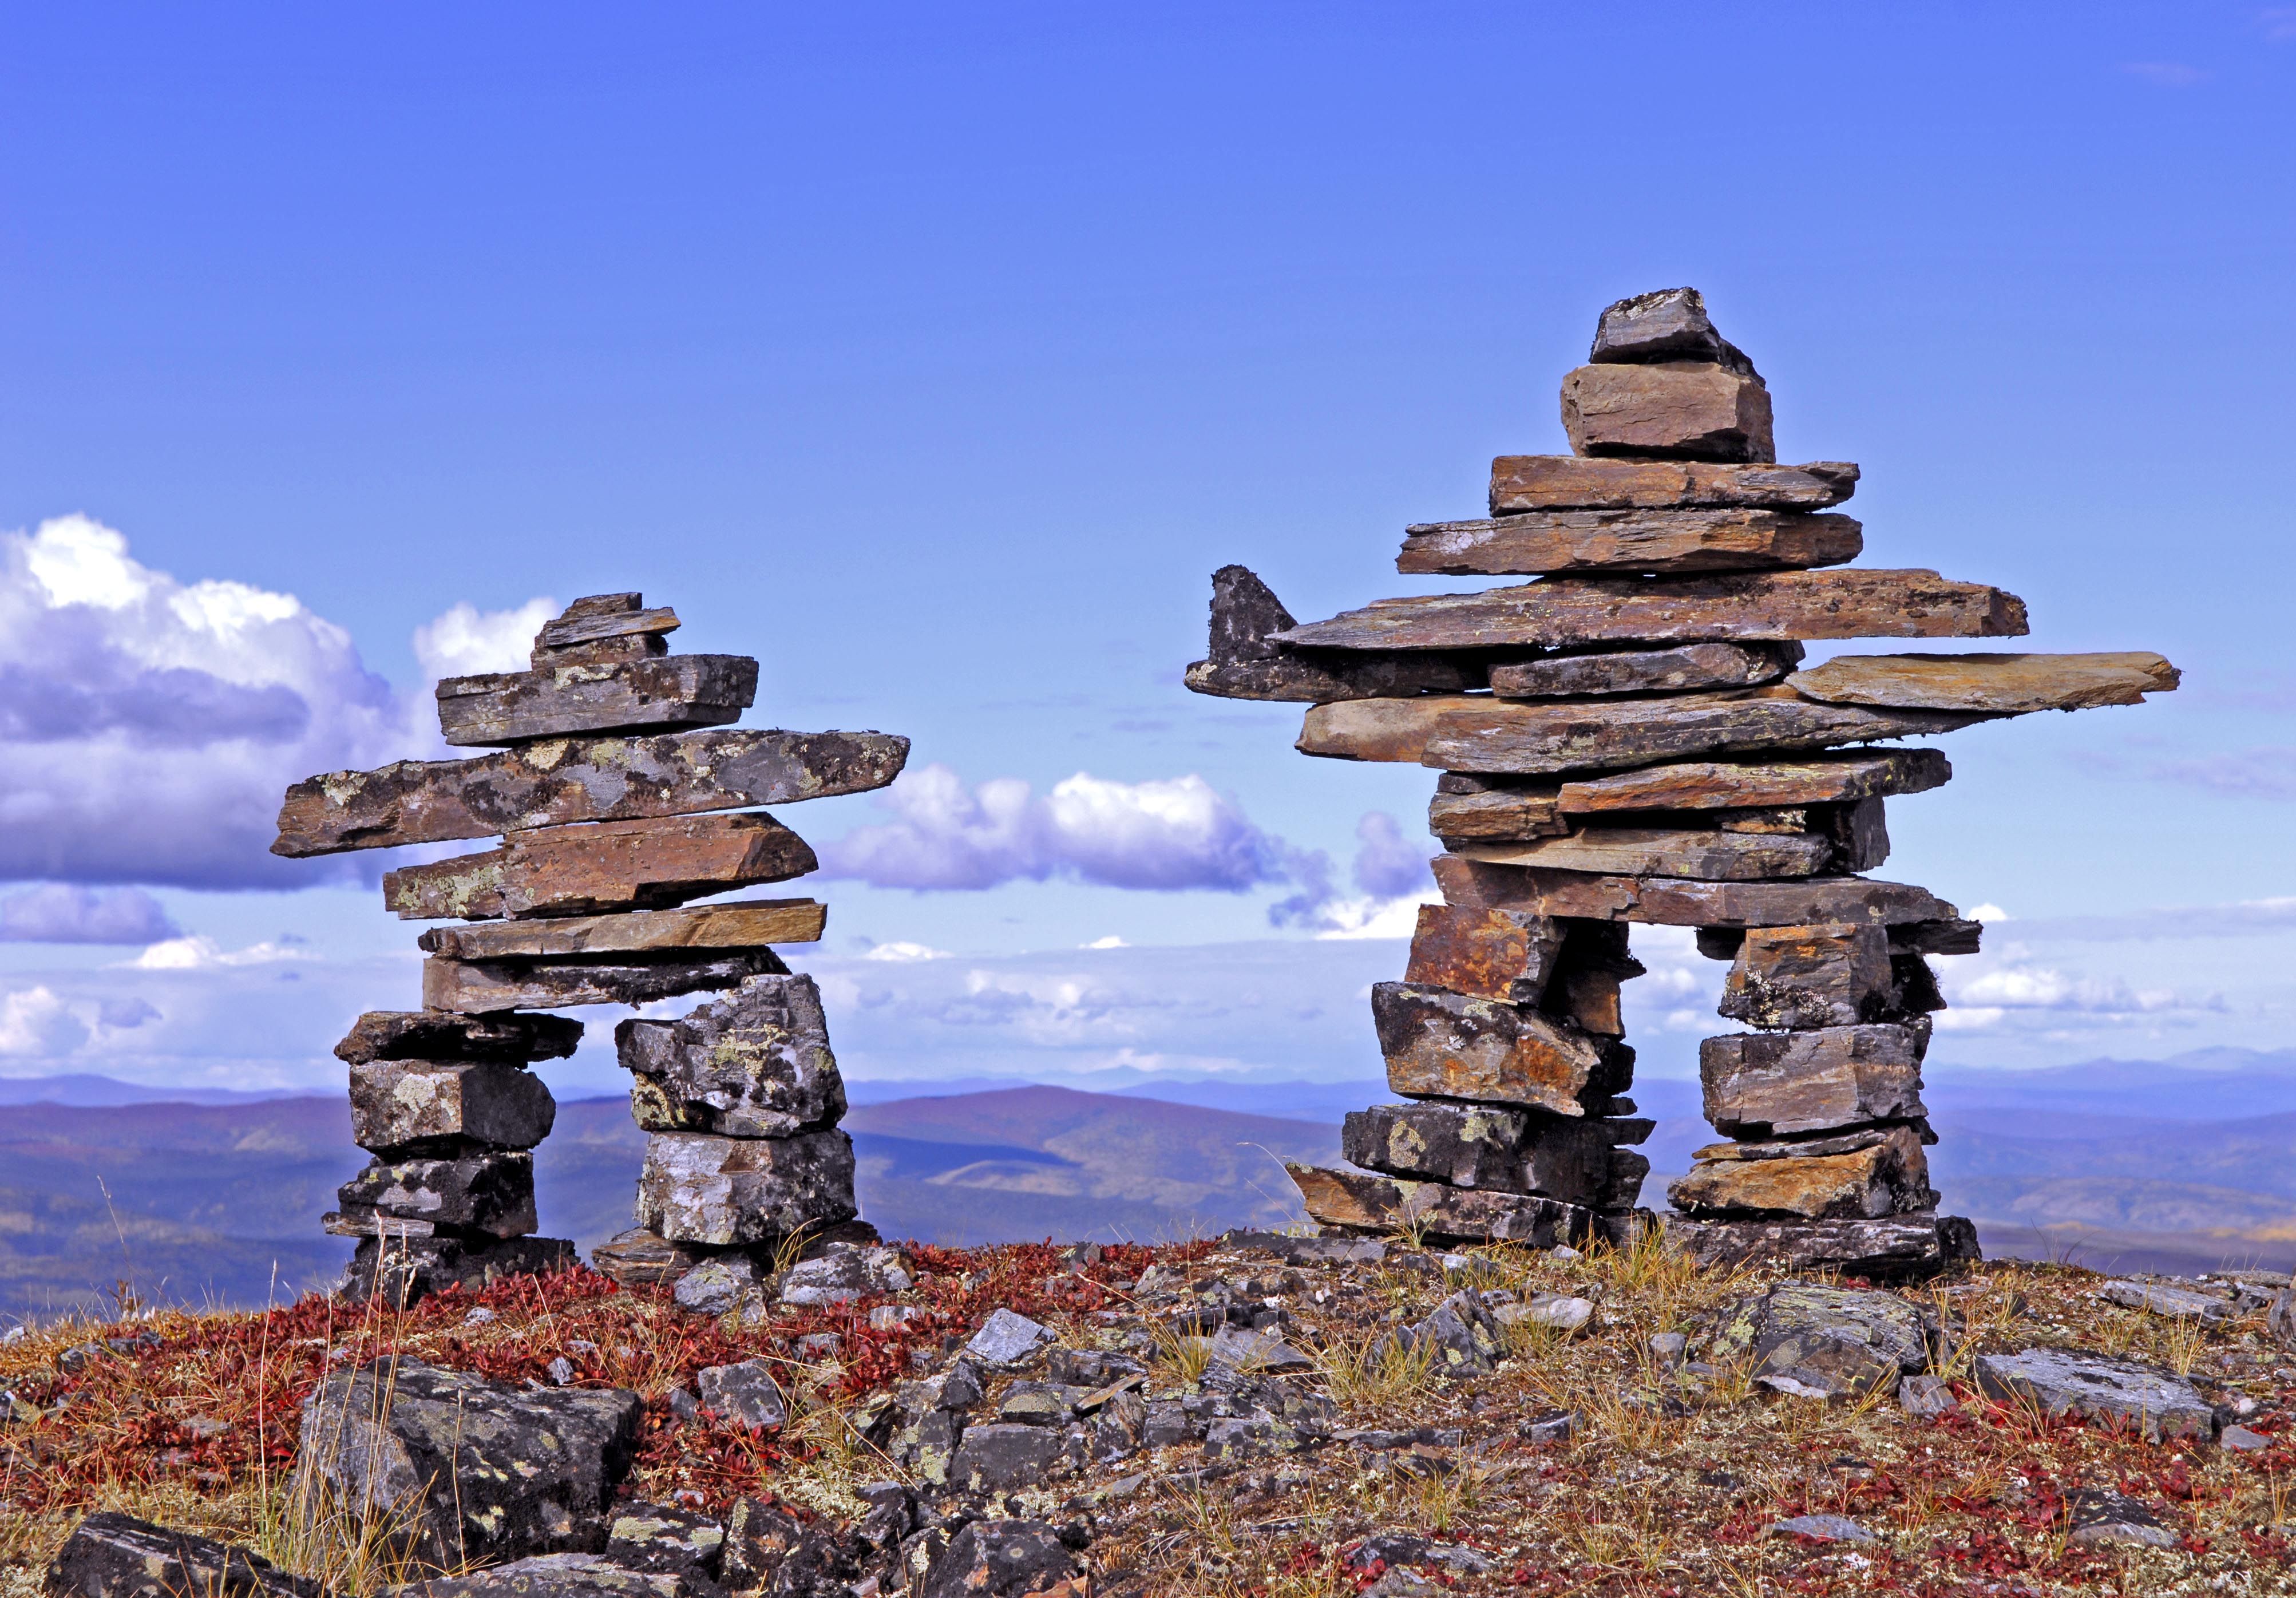 inukshuk......'In the likeness of a human' in Inuit language ...